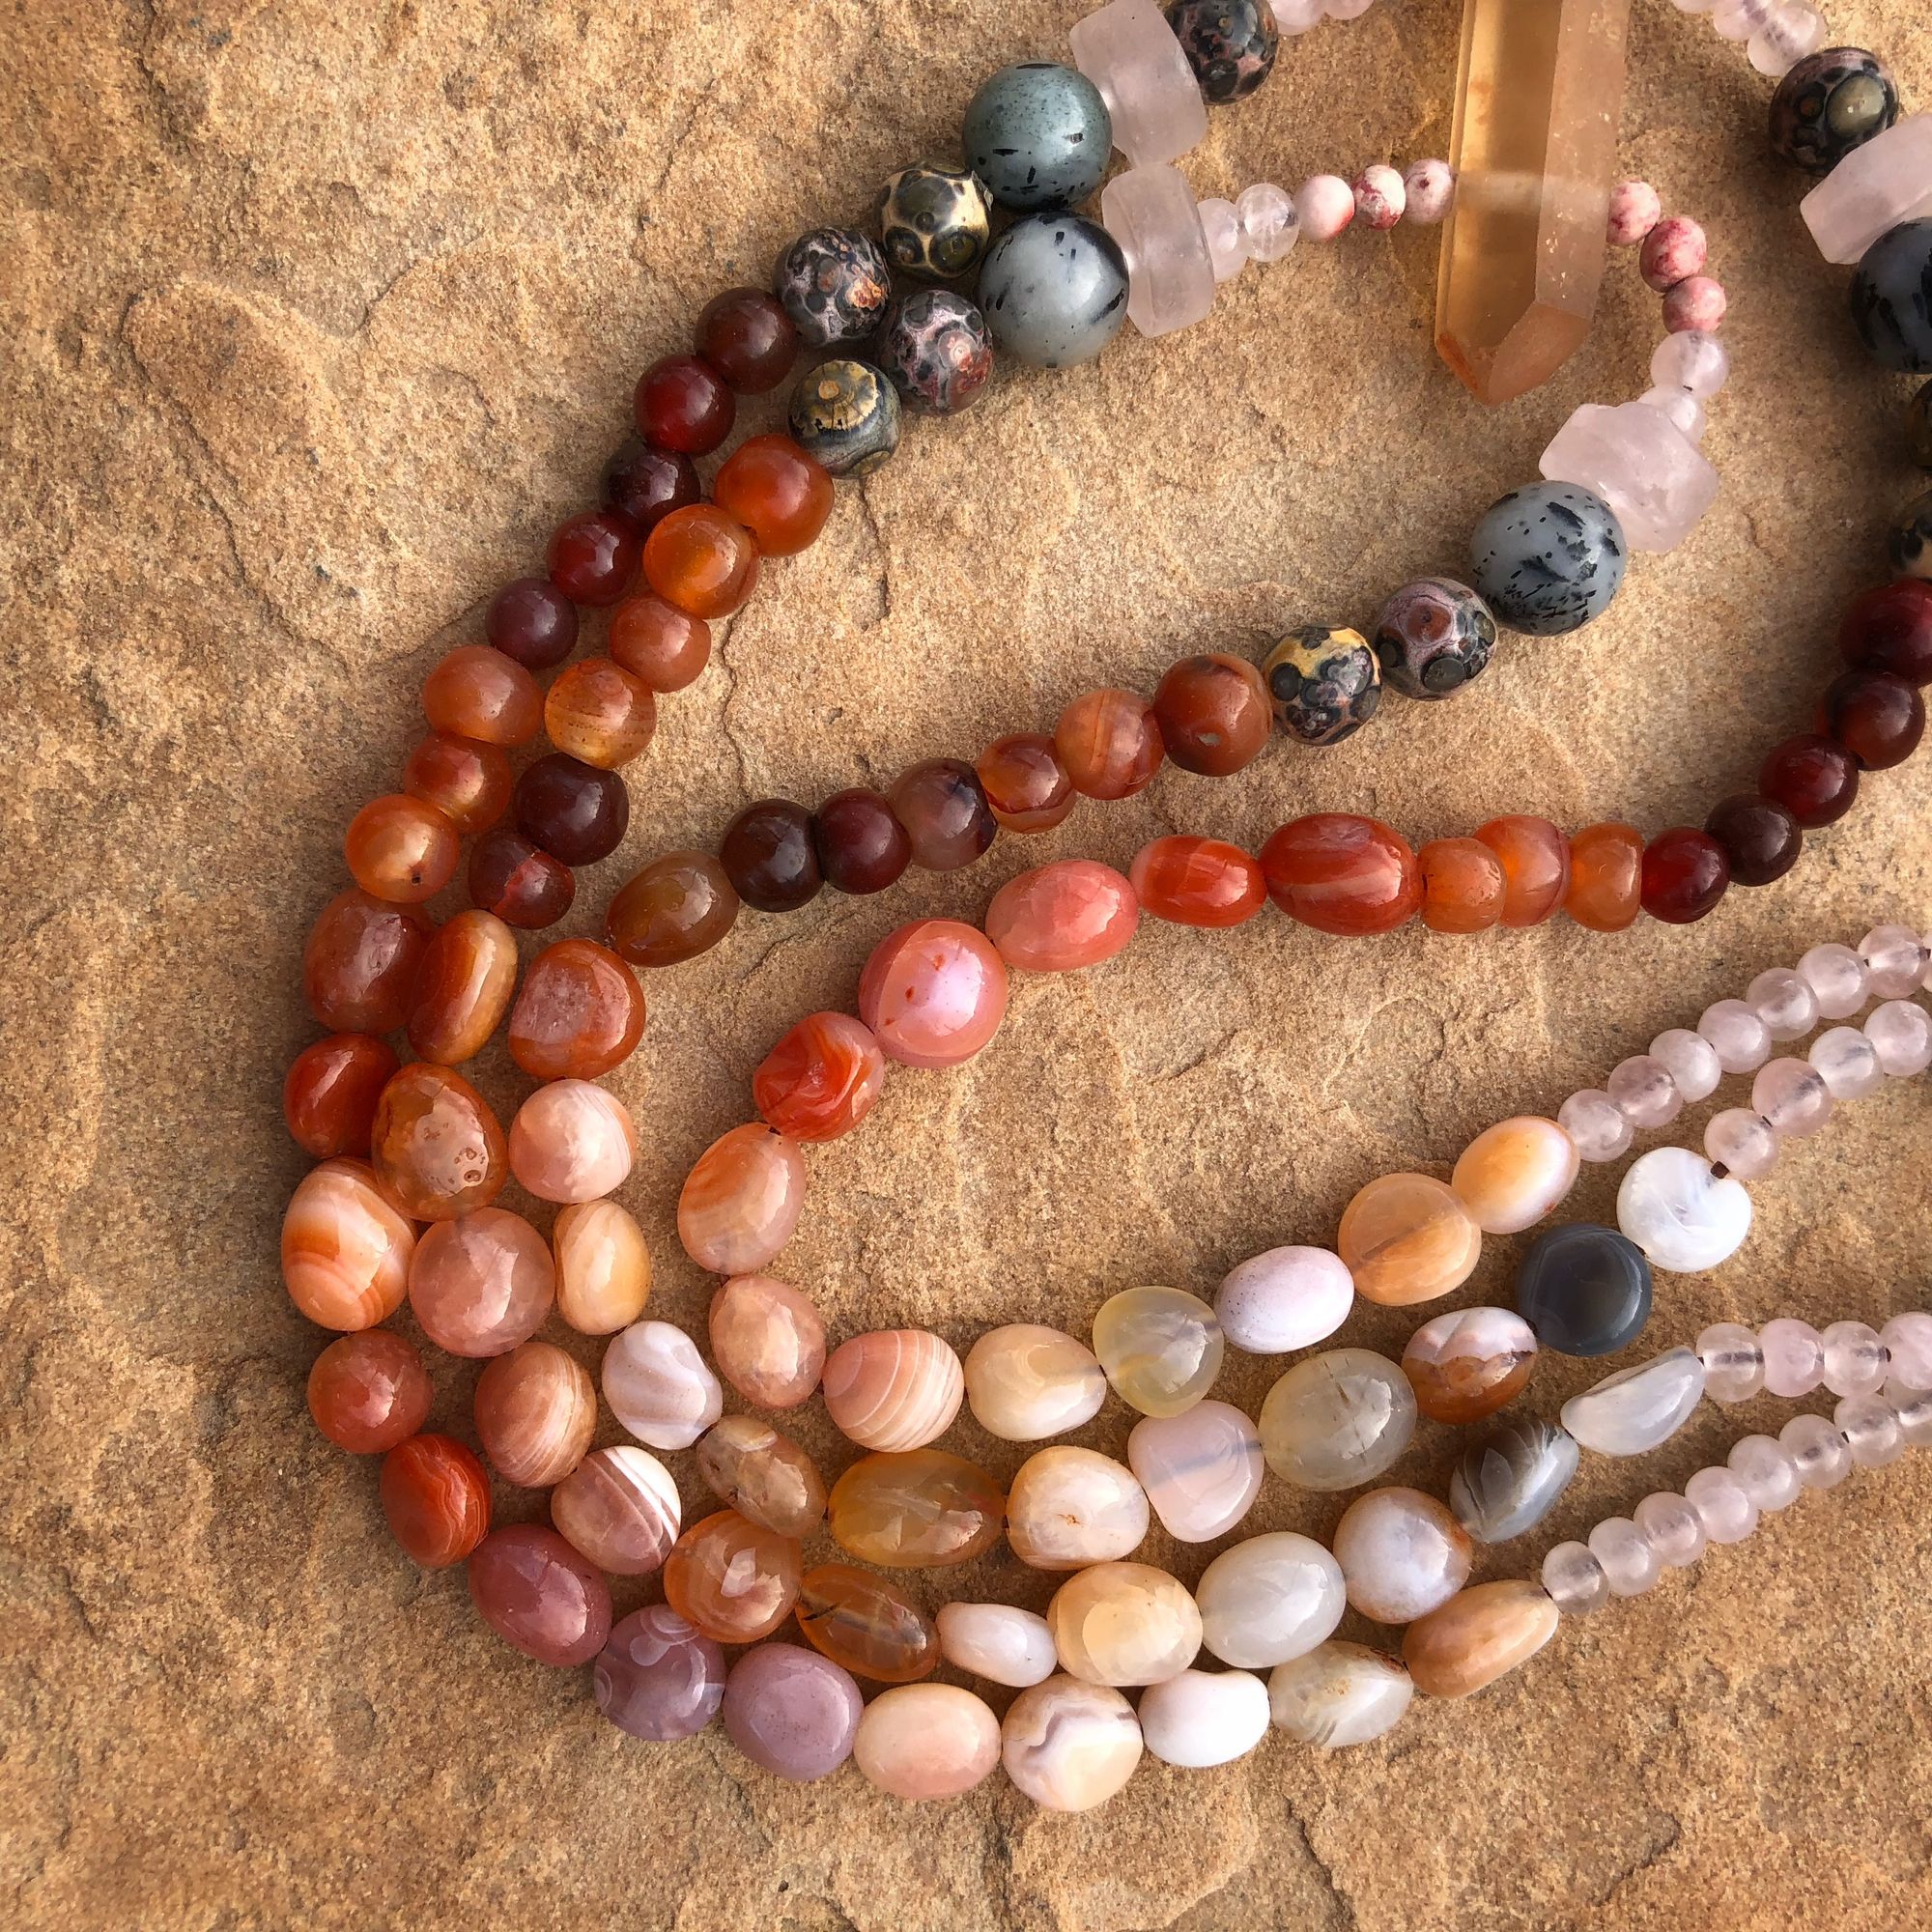 Necklace made of red, grey, orange, yellow and pink semi-precious stones laying on tan sandstone